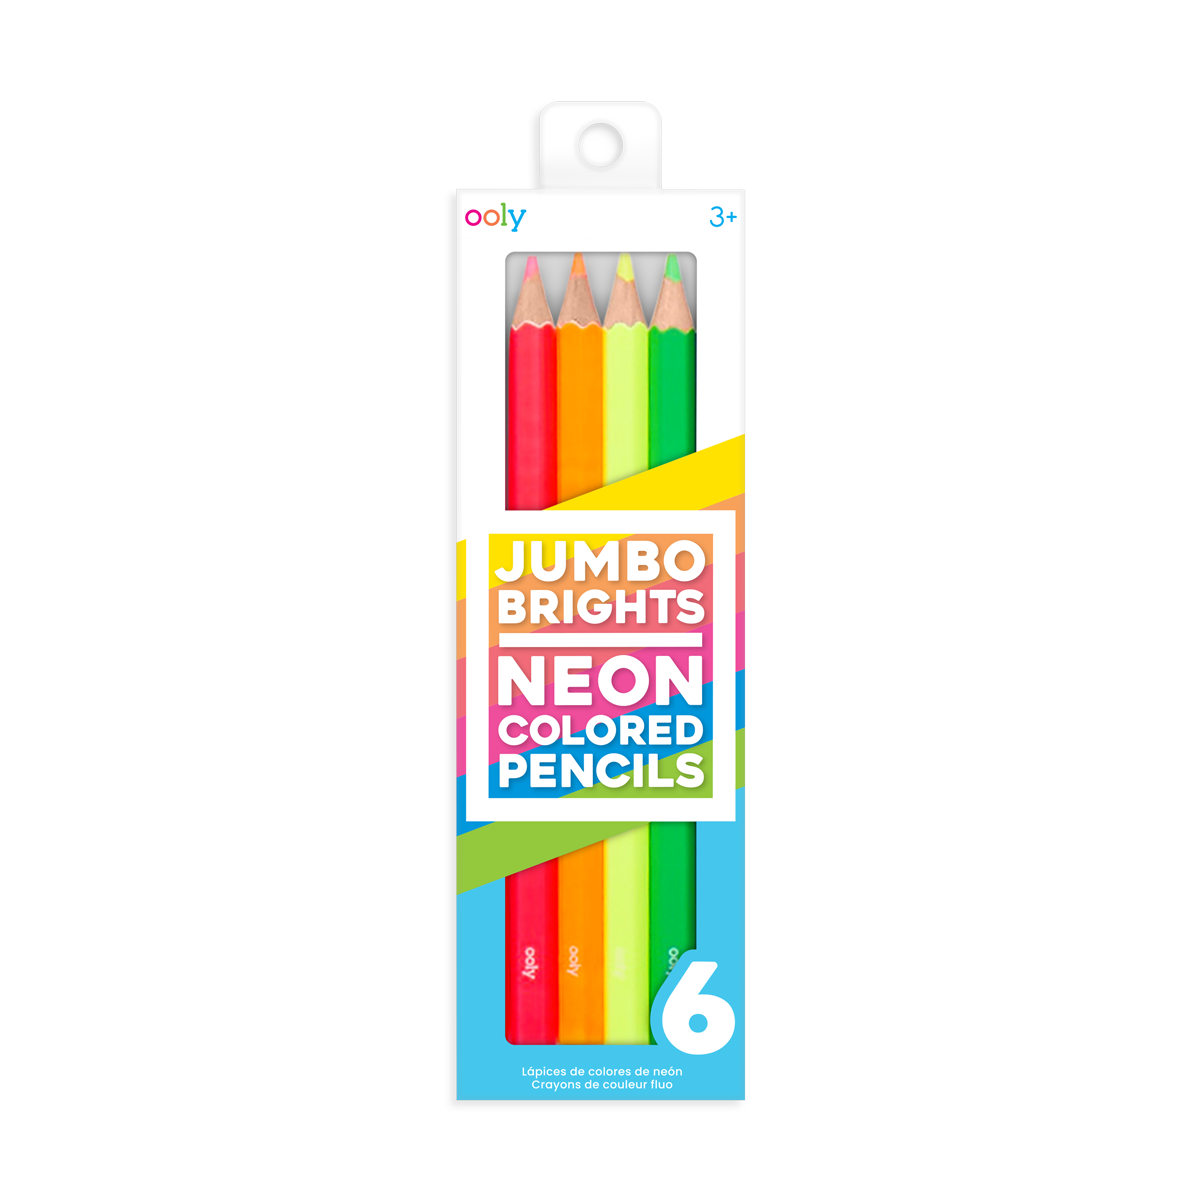 OOLY Jumbo Brights Neon Colored Pencils in packaging